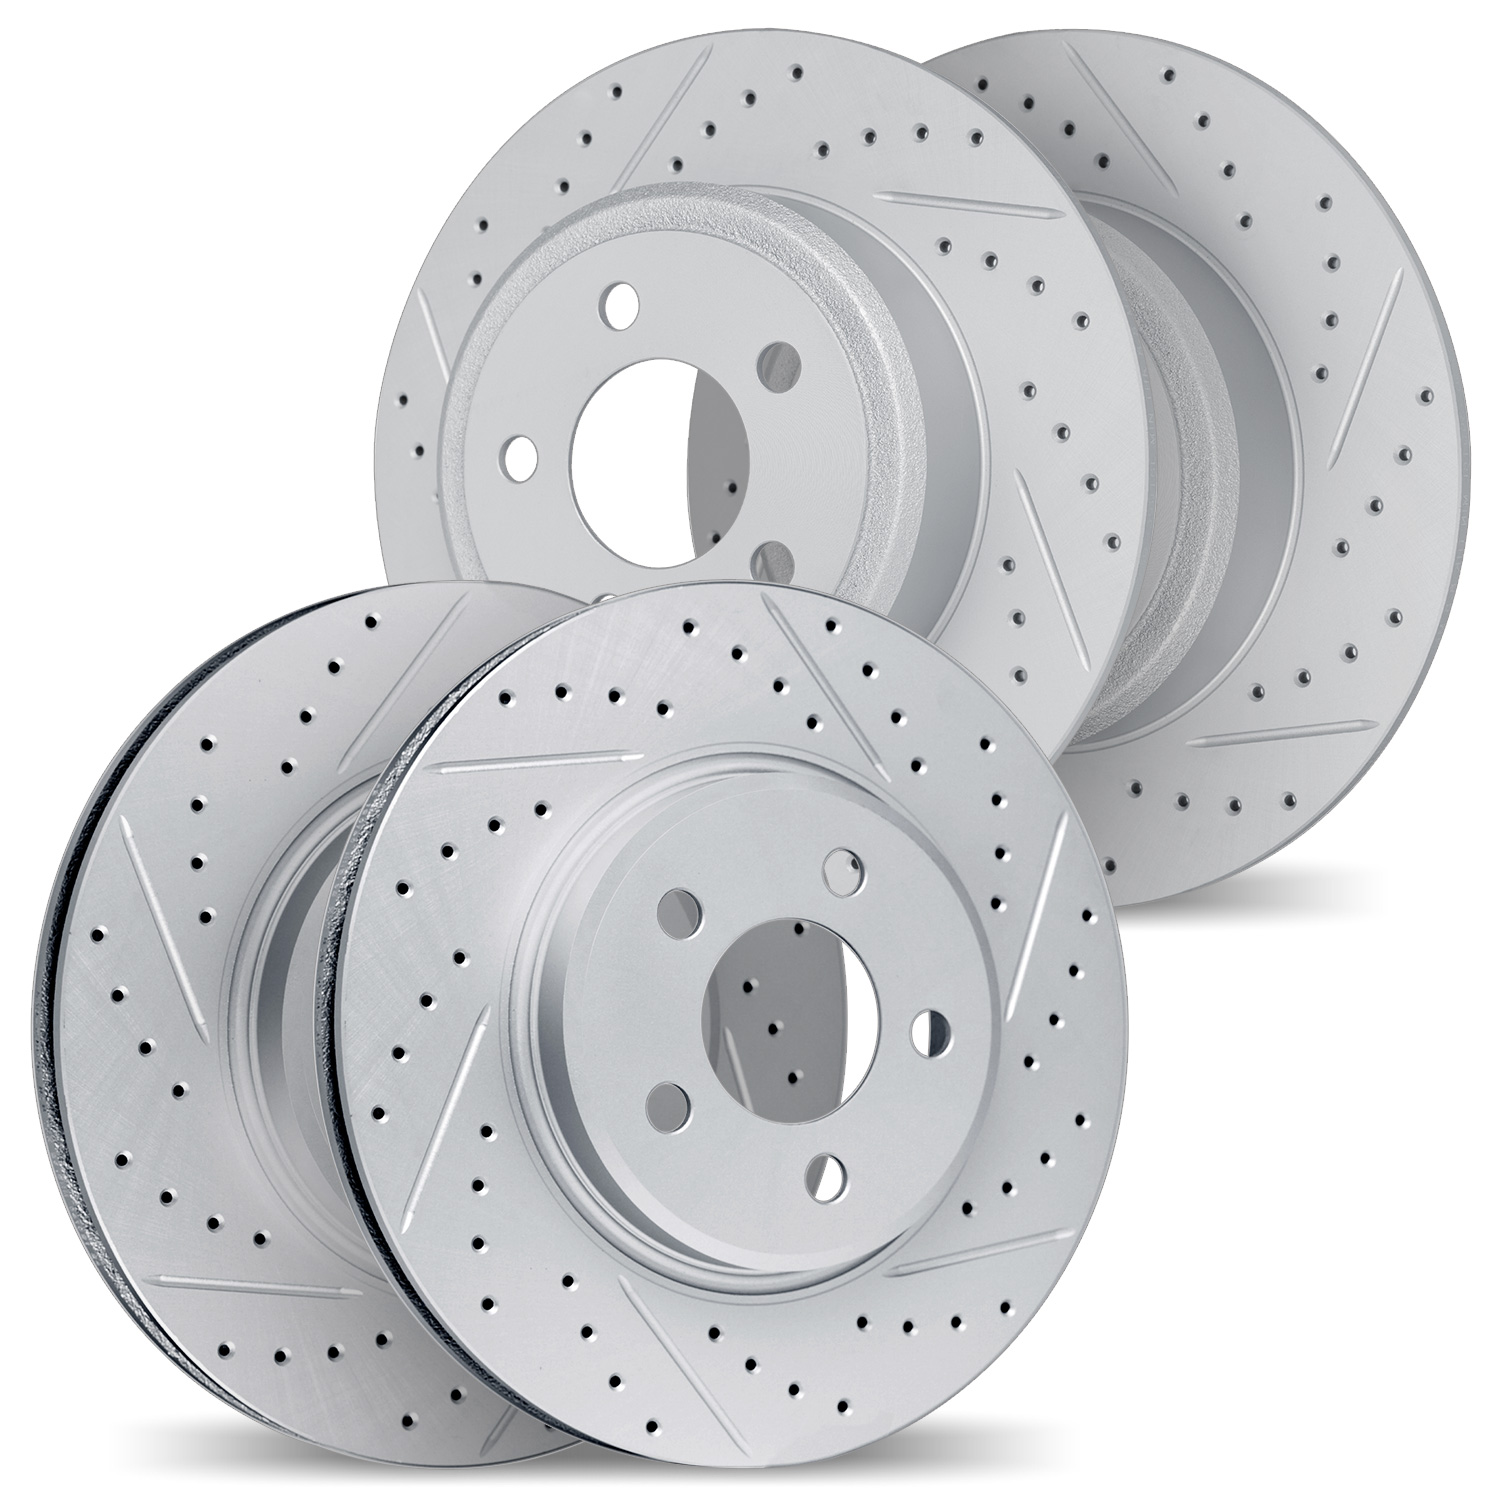 2004-45010 Geoperformance Drilled/Slotted Brake Rotors, Fits Select GM, Position: Front and Rear